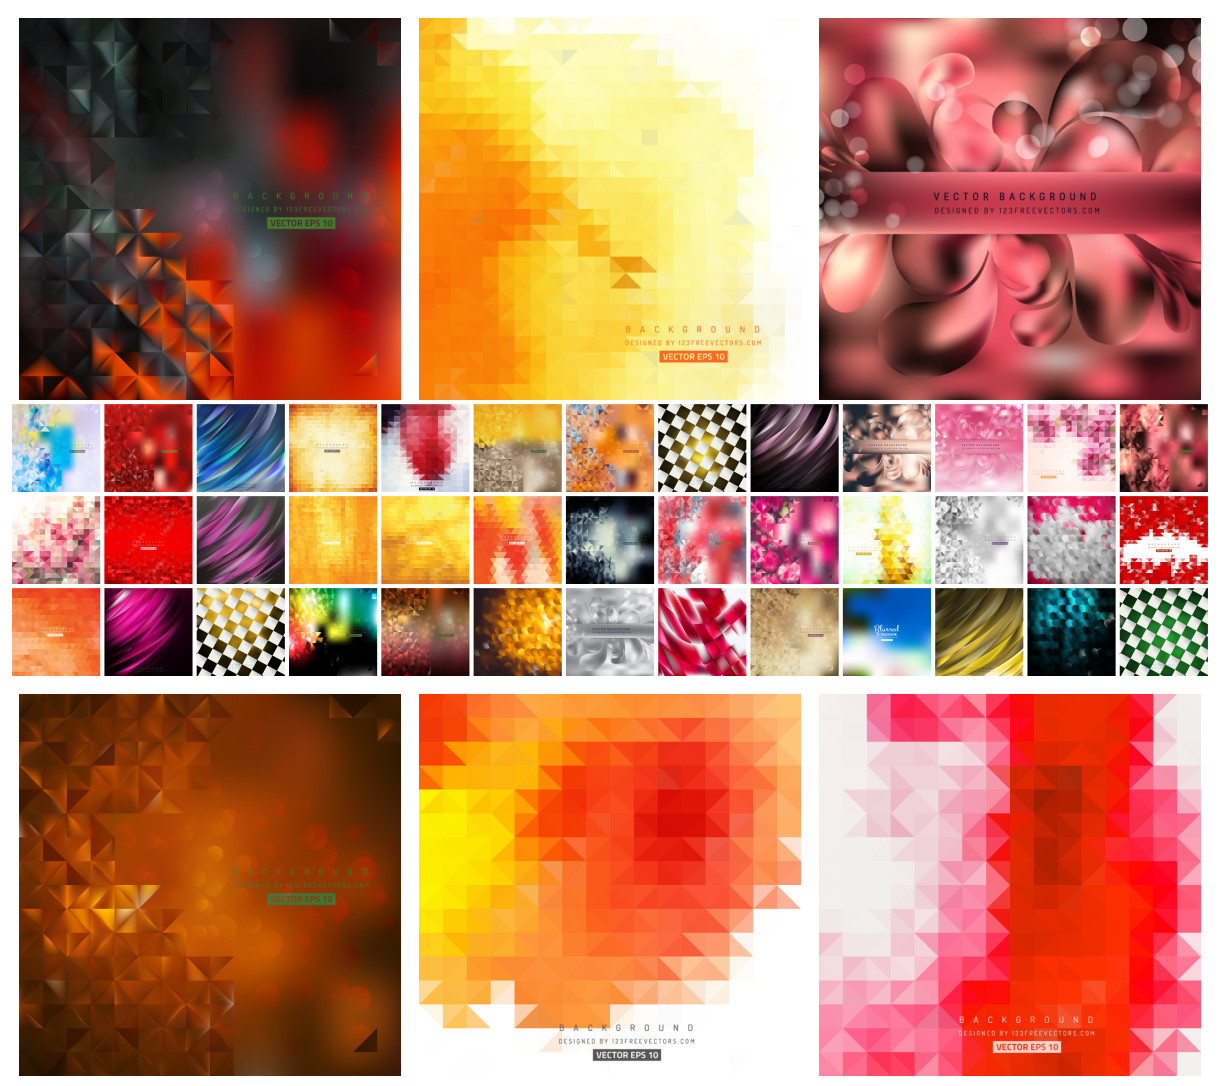 Captivating Clip Art Vector Collection: An Exploration in Abstract Background Designs